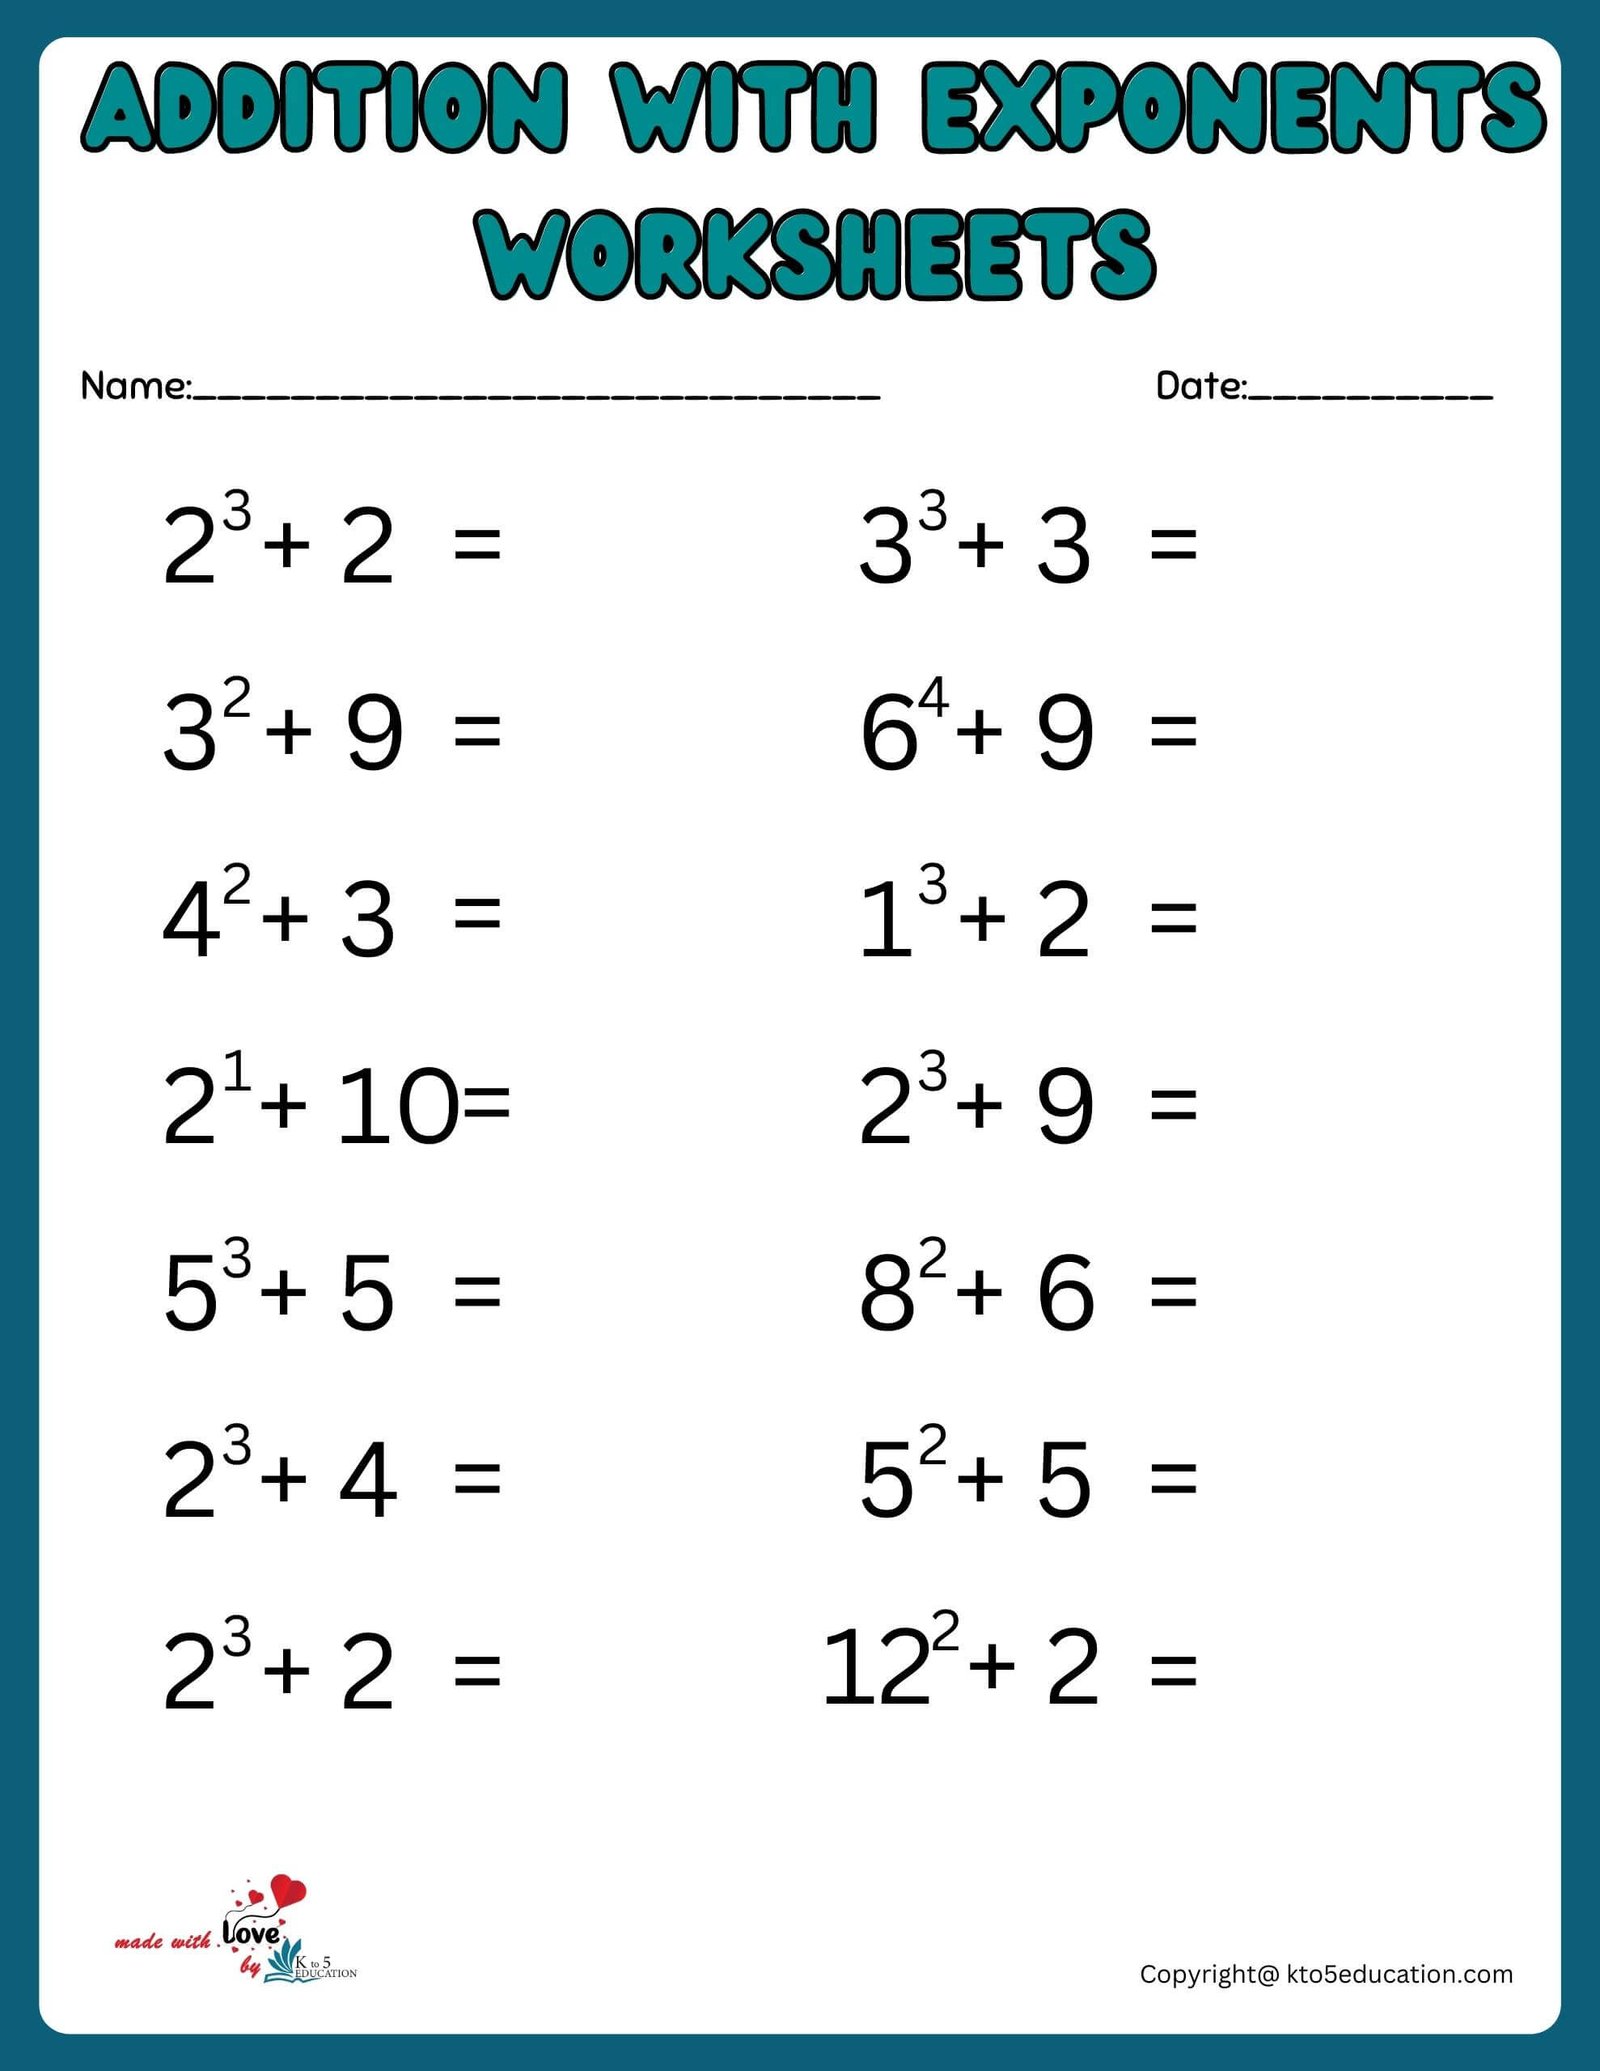 Addition With Exponents Online Activity Worksheet